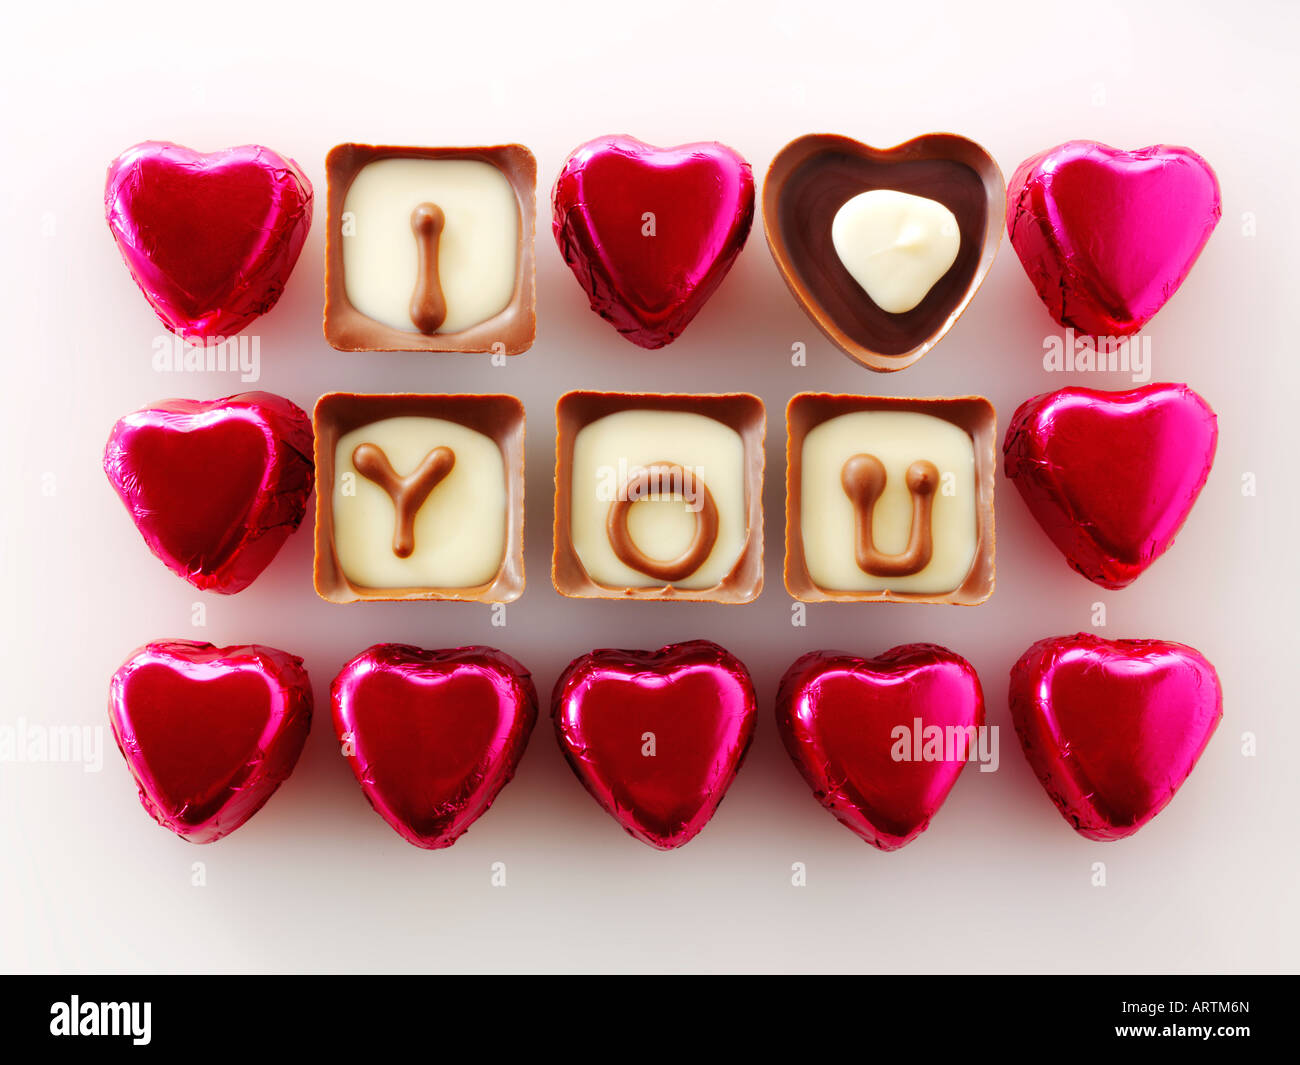 I Love You written in chocolates with red heart shaped chocolates. Stock Photo